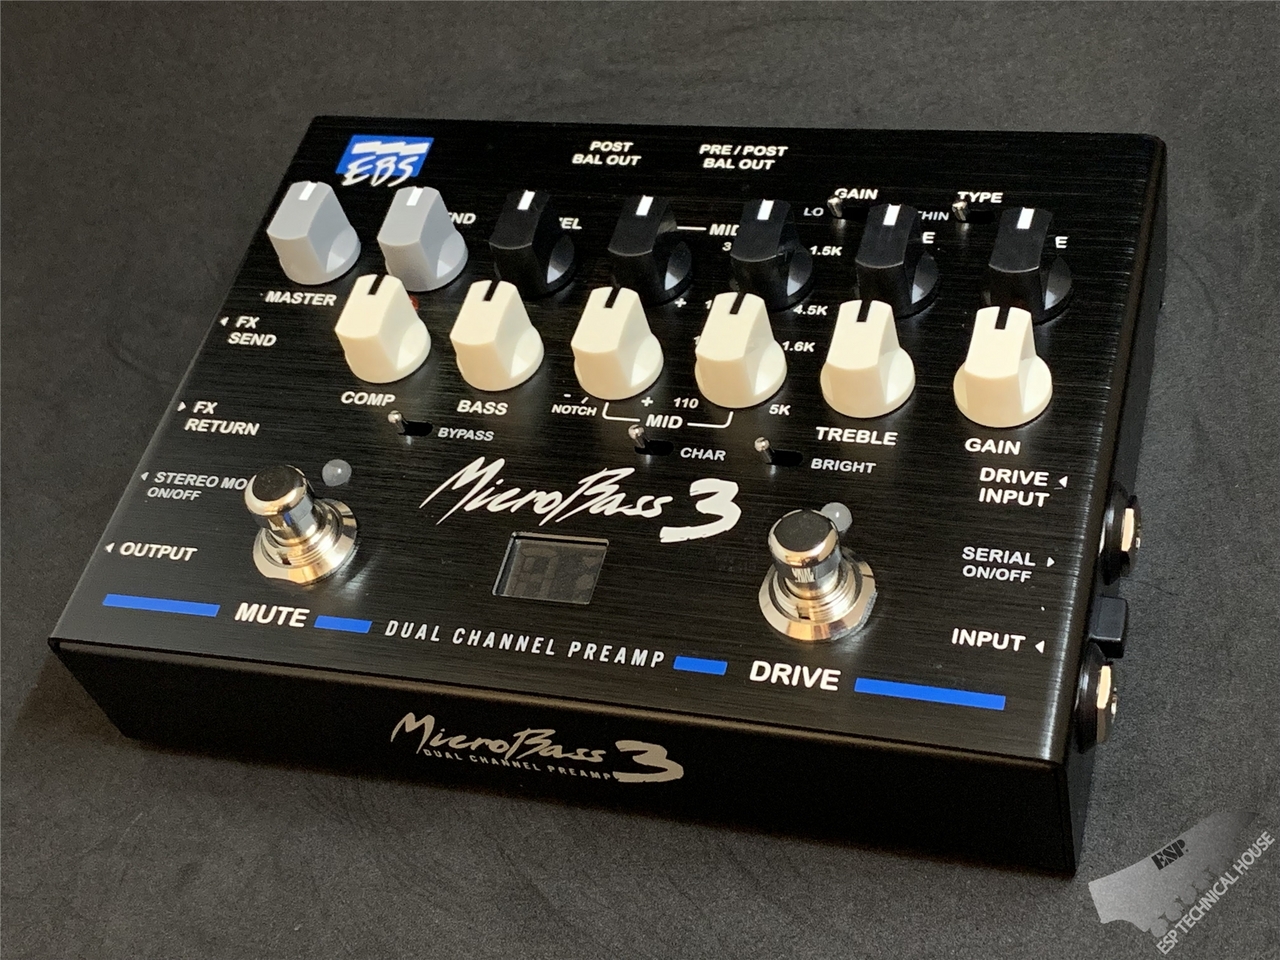 EBS MicroBass 2 マイクロベース 2 プリアンプ 楽器・機材 | www.stb